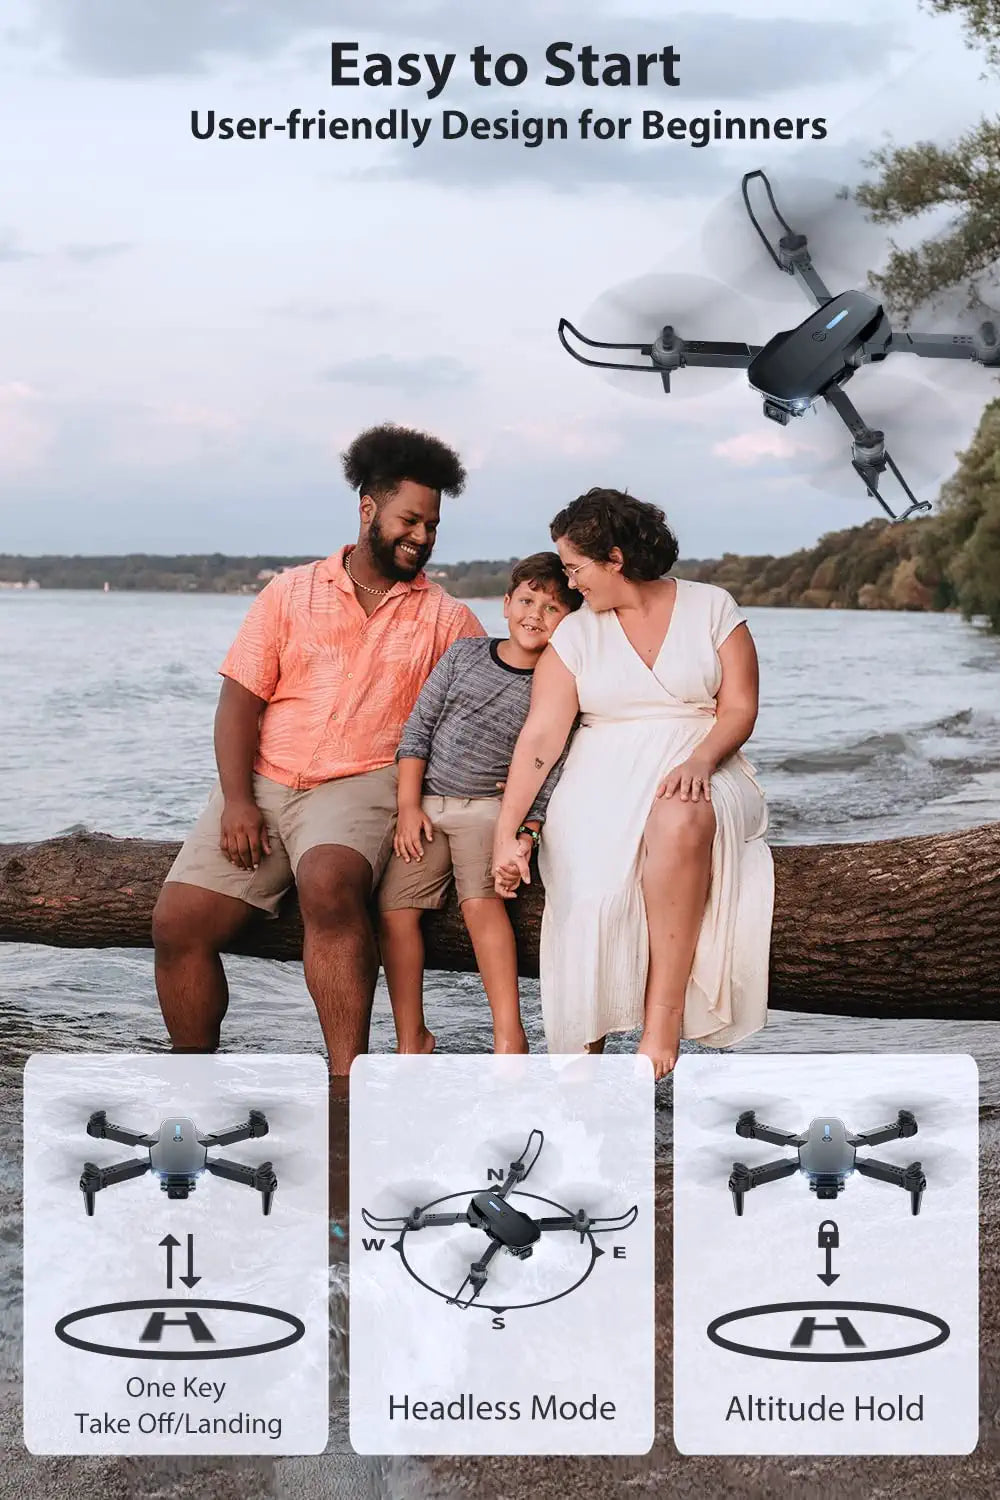 Hilldow D11 Drone - 1080P HD Mini Drone for Kids, FPV RC Quadcopter 30 Min Long Flight Time in 3 Batteries, 3D Flip, Outdoor Carrying Case, Gift for Girls/Boys/Teens - RCDrone